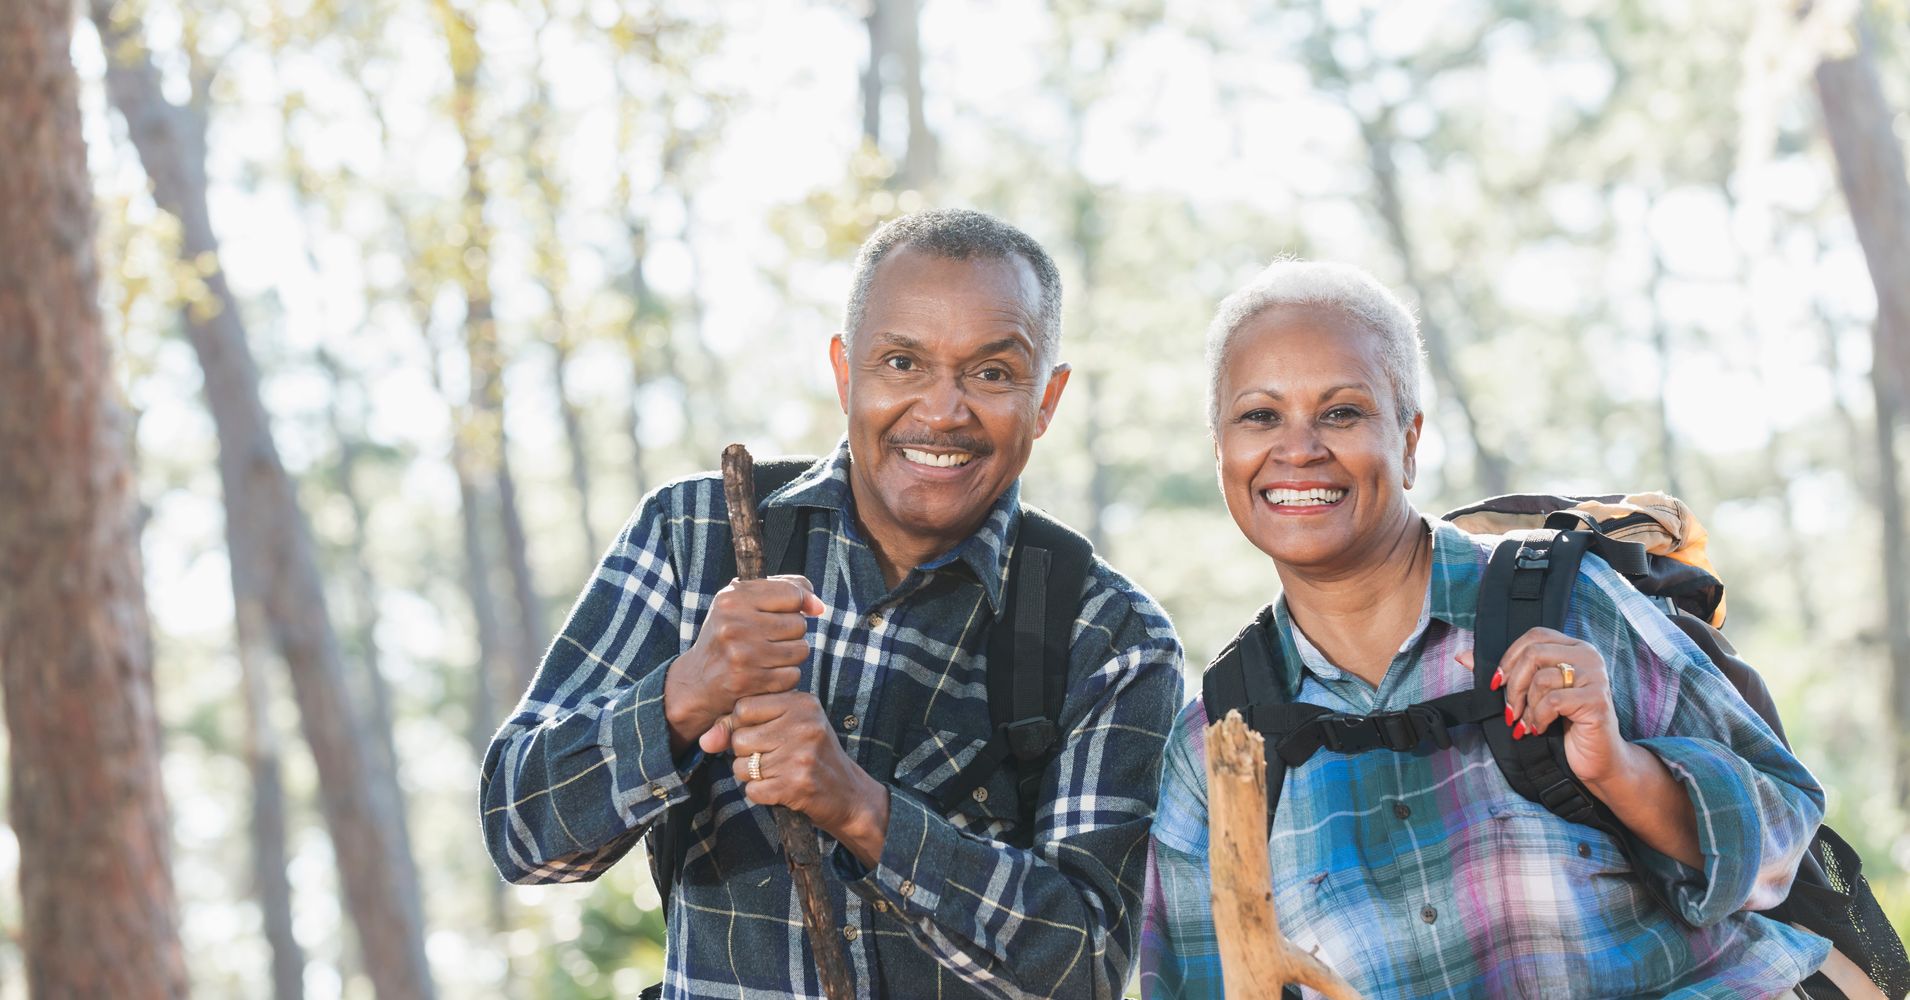 Baby Boomers – Get a New Attitude About Your Health | HuffPost Life